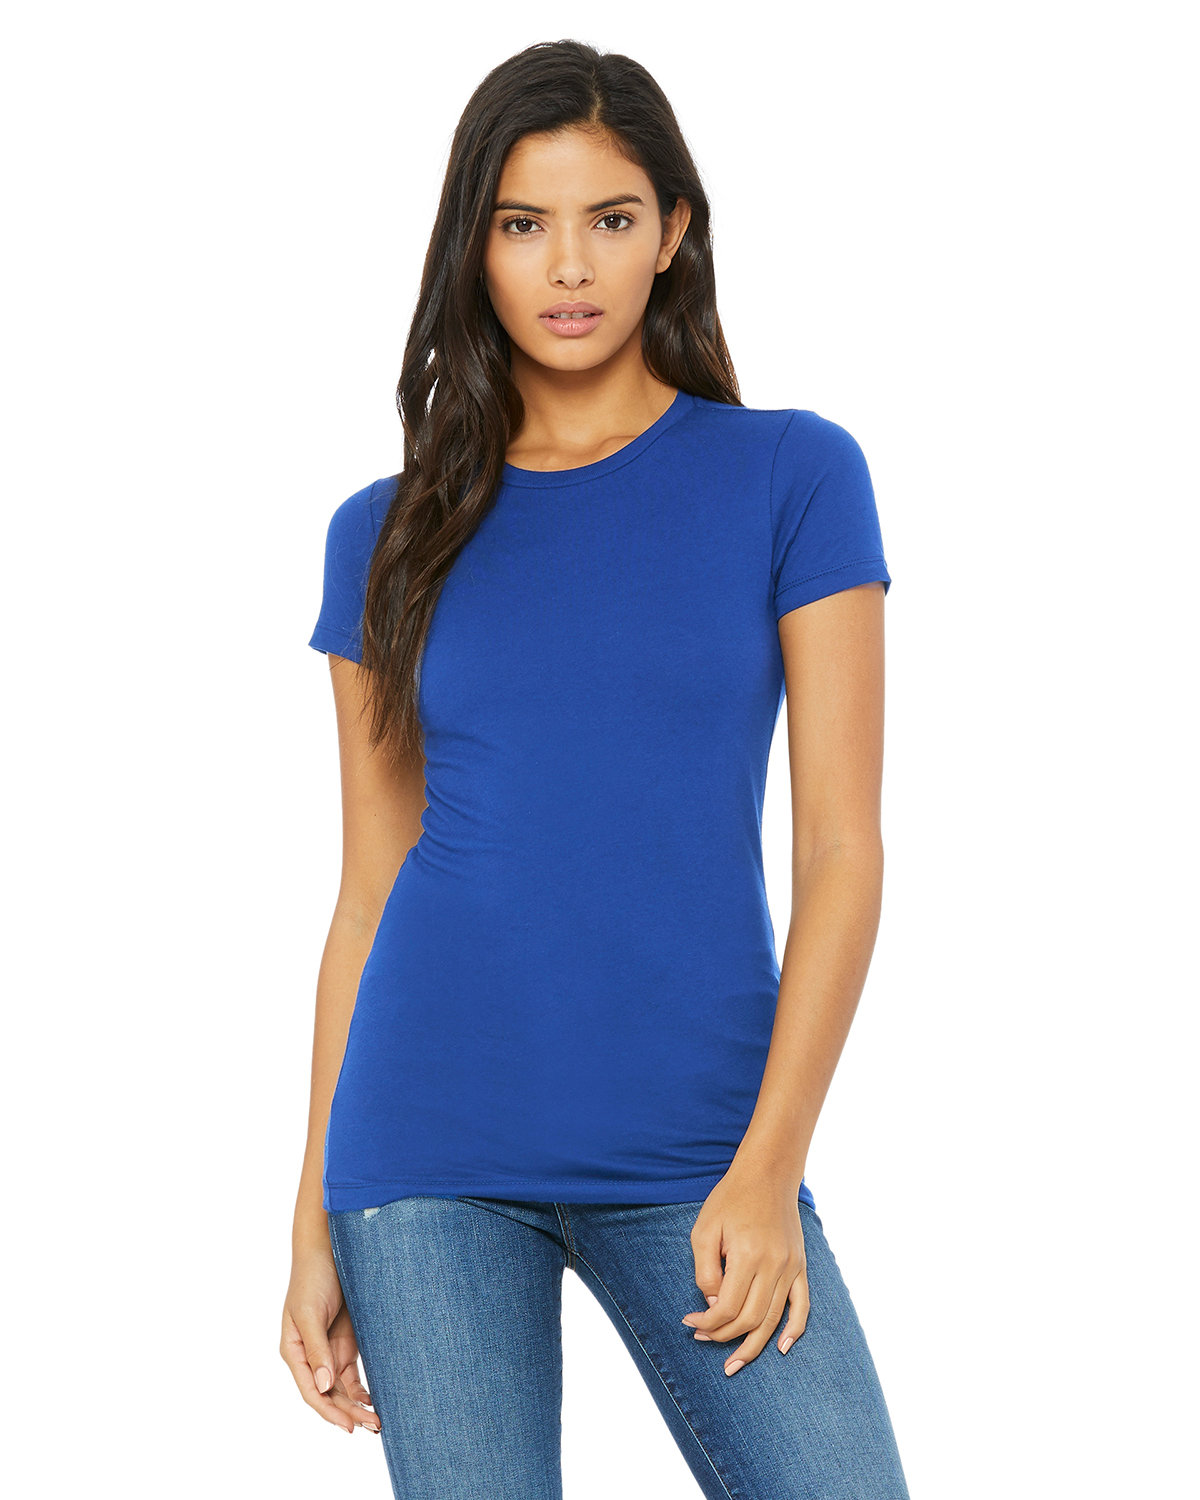 Women's White, Royal, and Silver All-American Jersey-Style Tee X-Small